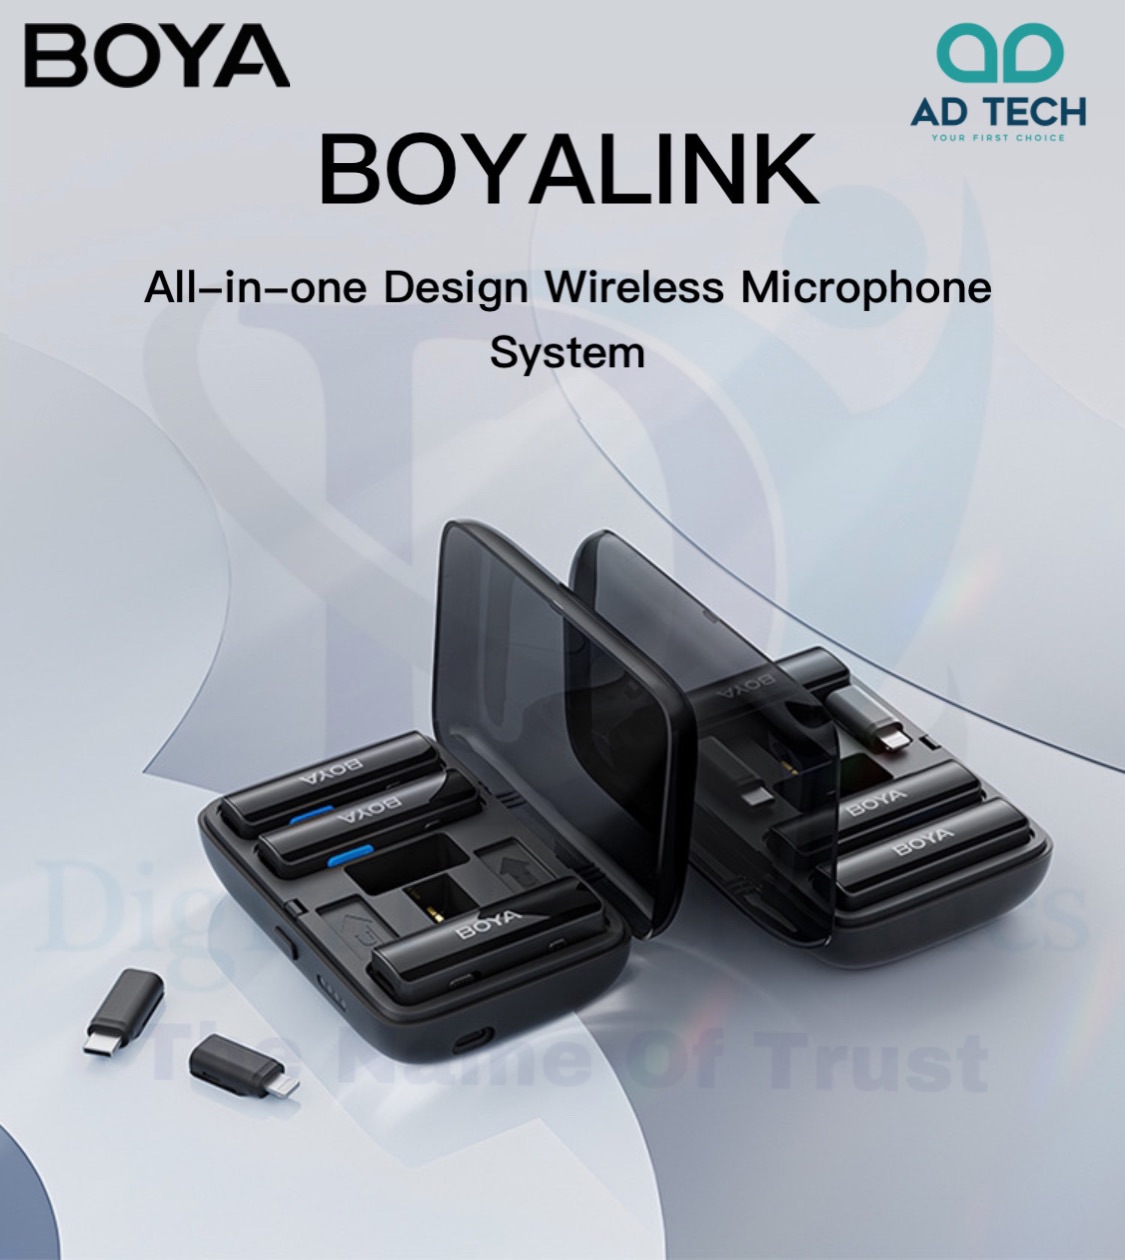 BOYALINK All-in-one Design Wireless Microphone System 